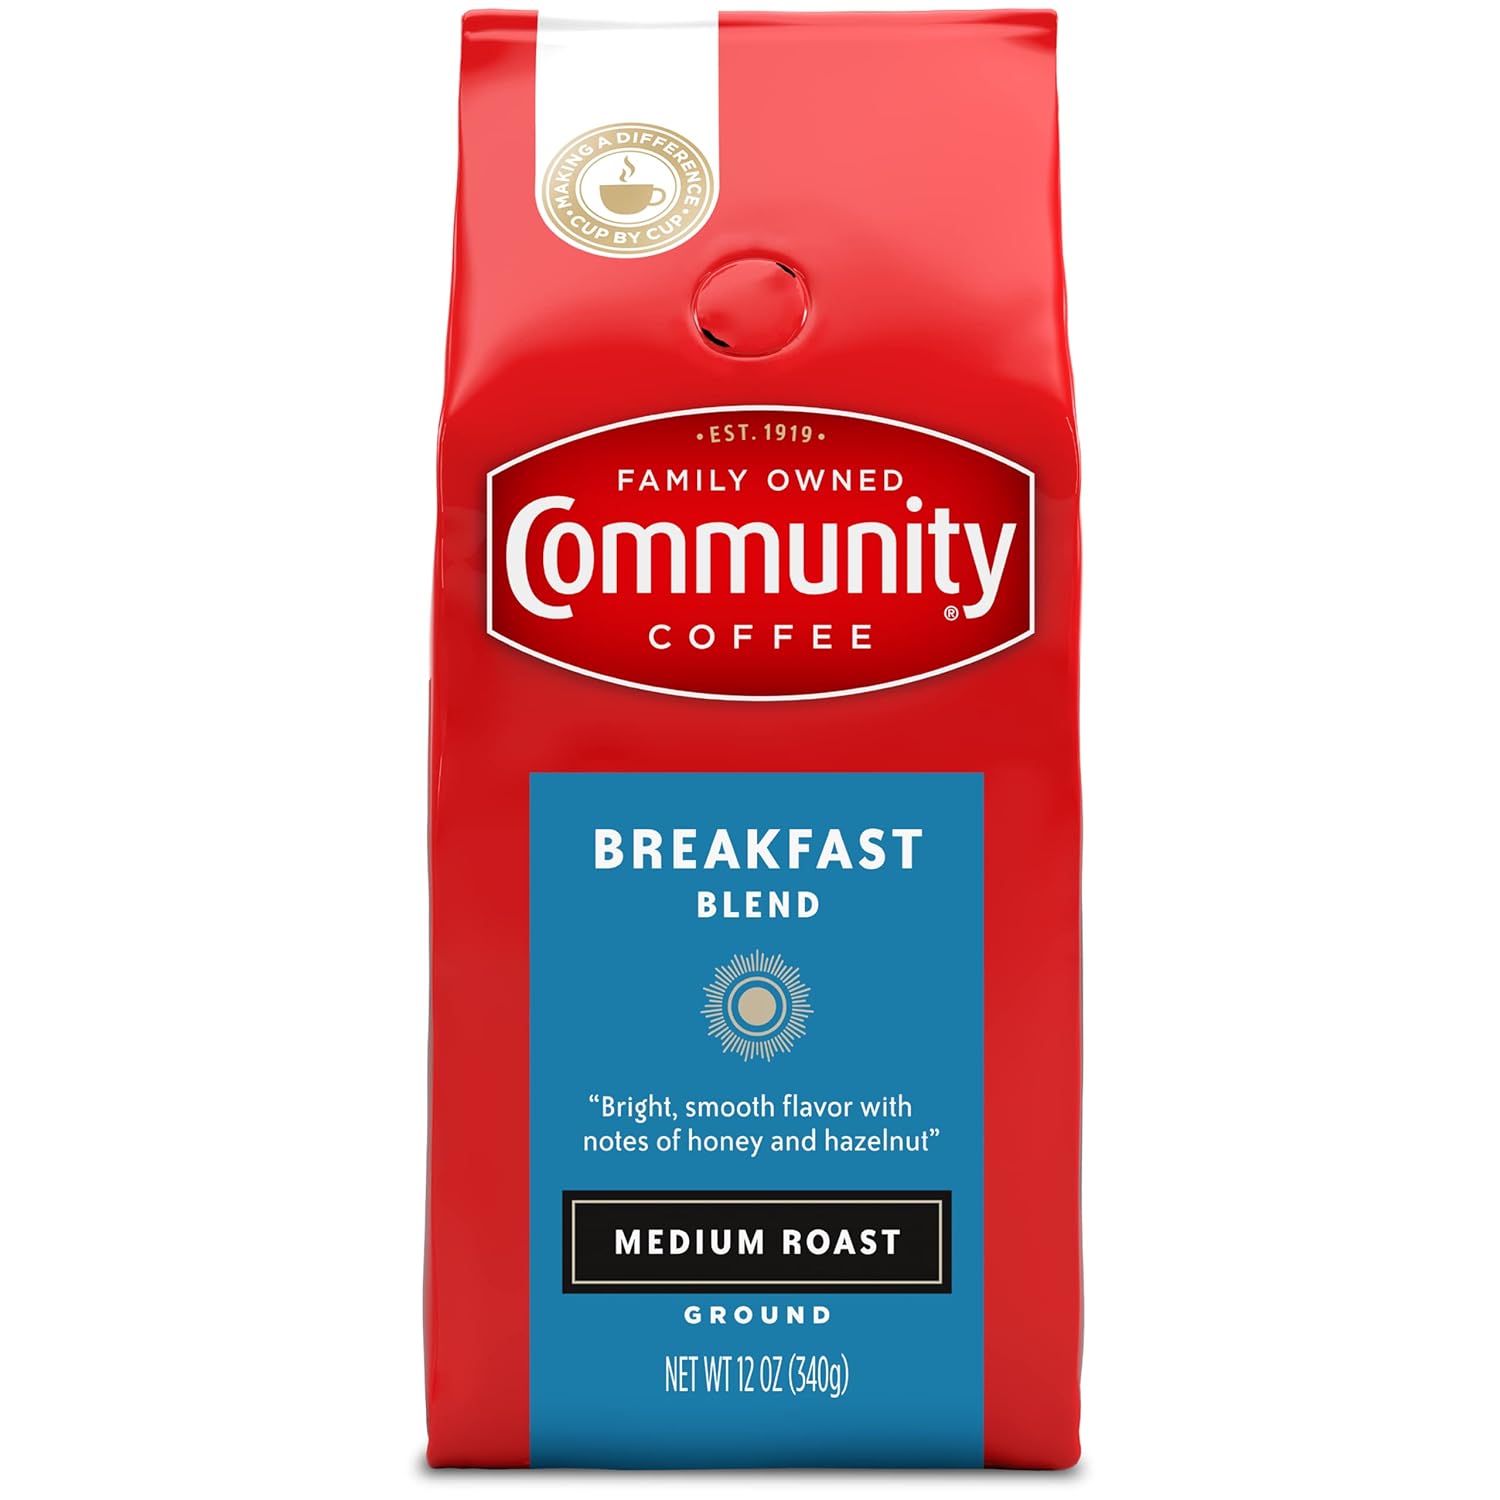 I have been drinking this brand of Community all my life. Its a great medium, smooth coffee. I like the flavor and its a great value.